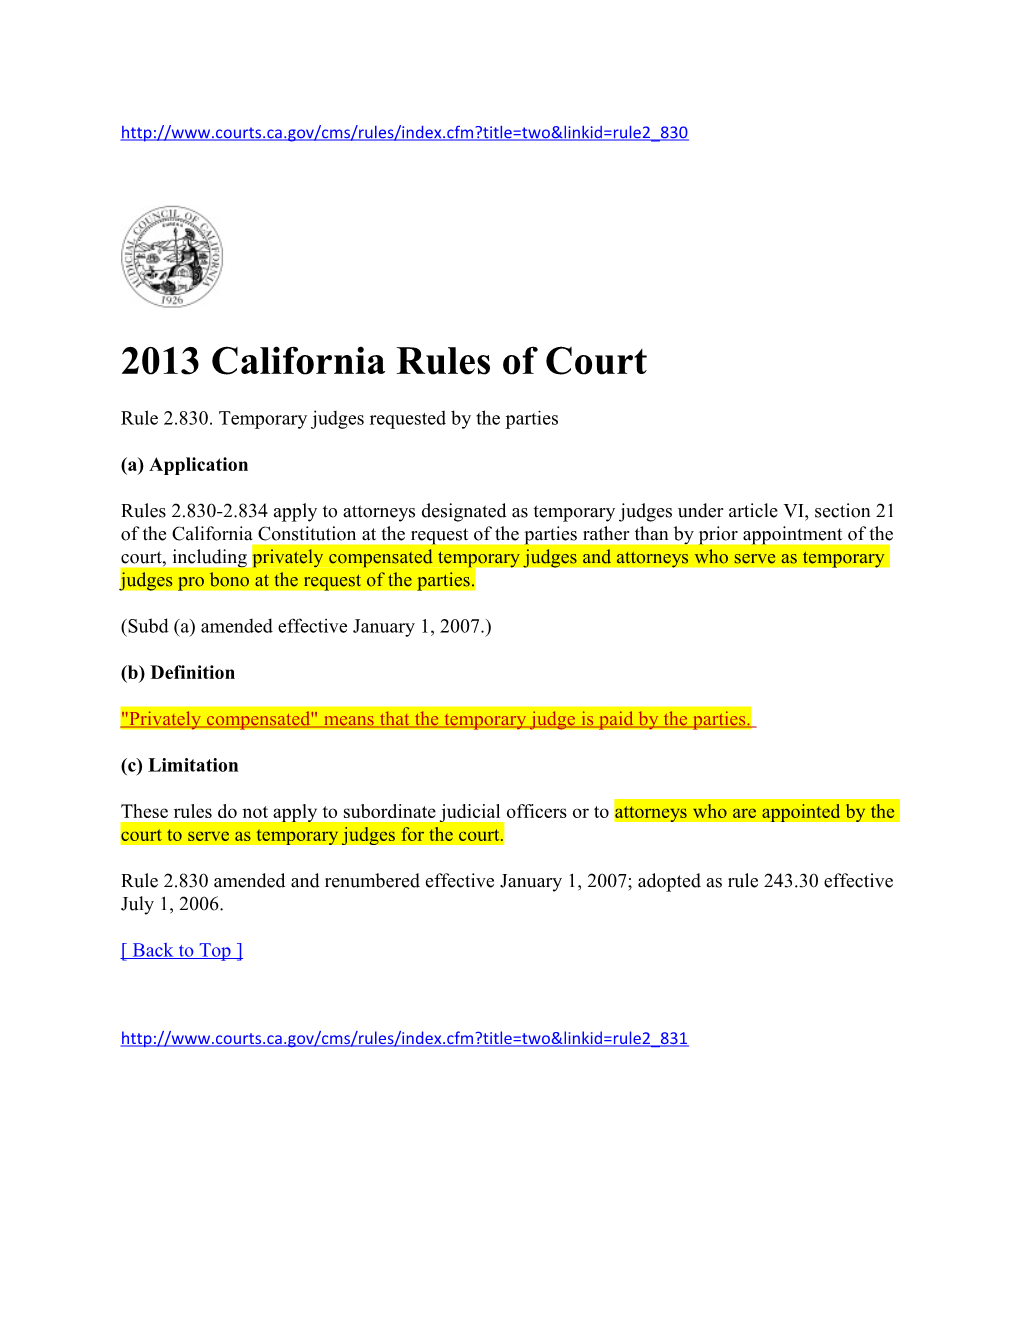 2013 California Rules of Court